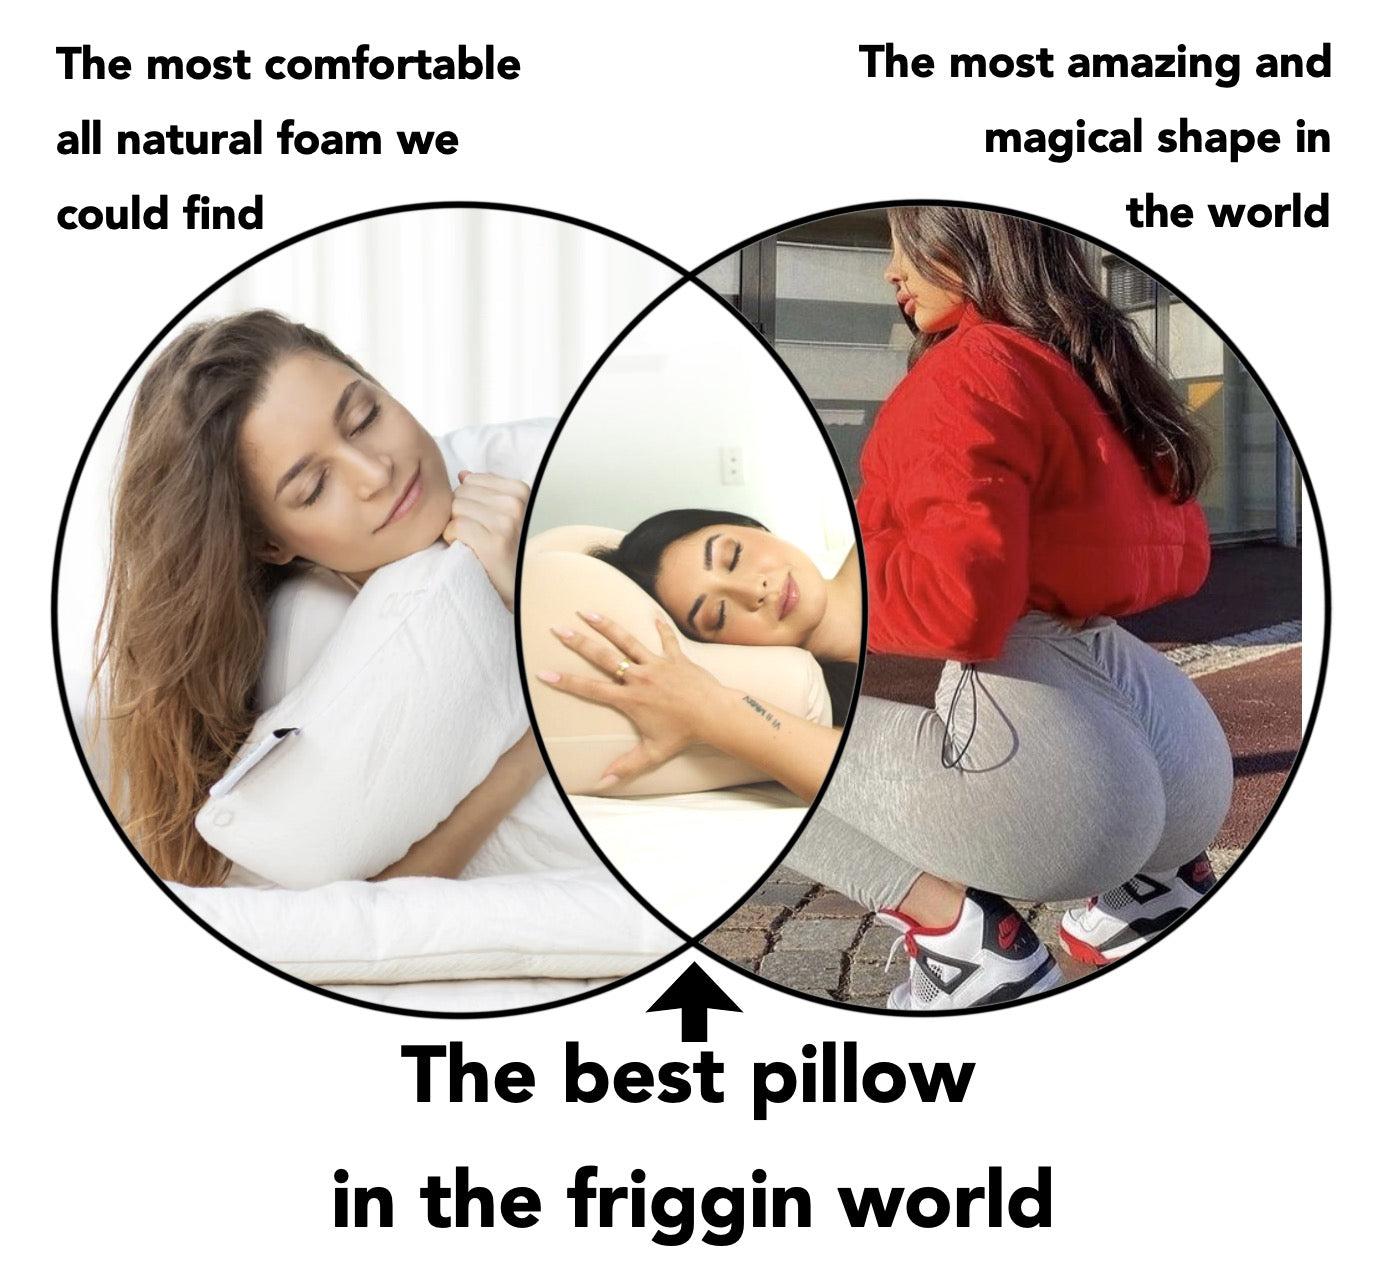 The question is... why NOT sleep on a butt pillow?